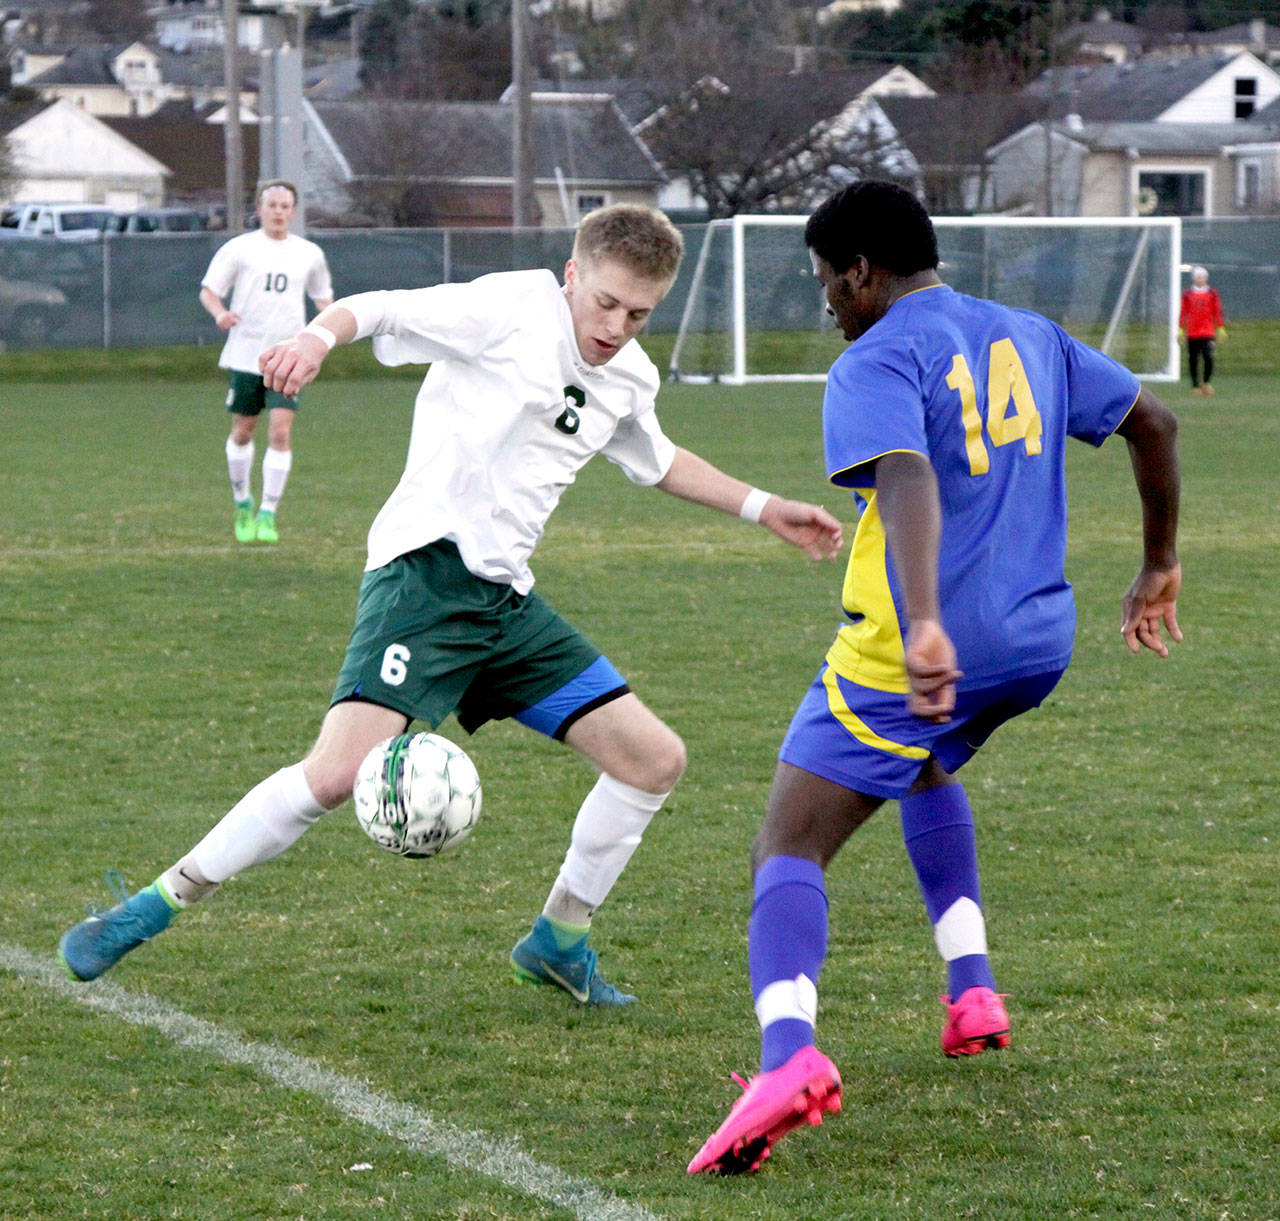 Port Angeles’s Ben Schneider fights to control the ball along the sidelines while Bremerton’s Philip Curtis tries to defend in Monday’s game at Civic Field. (Dave Logan/for Peninsula Daily News)